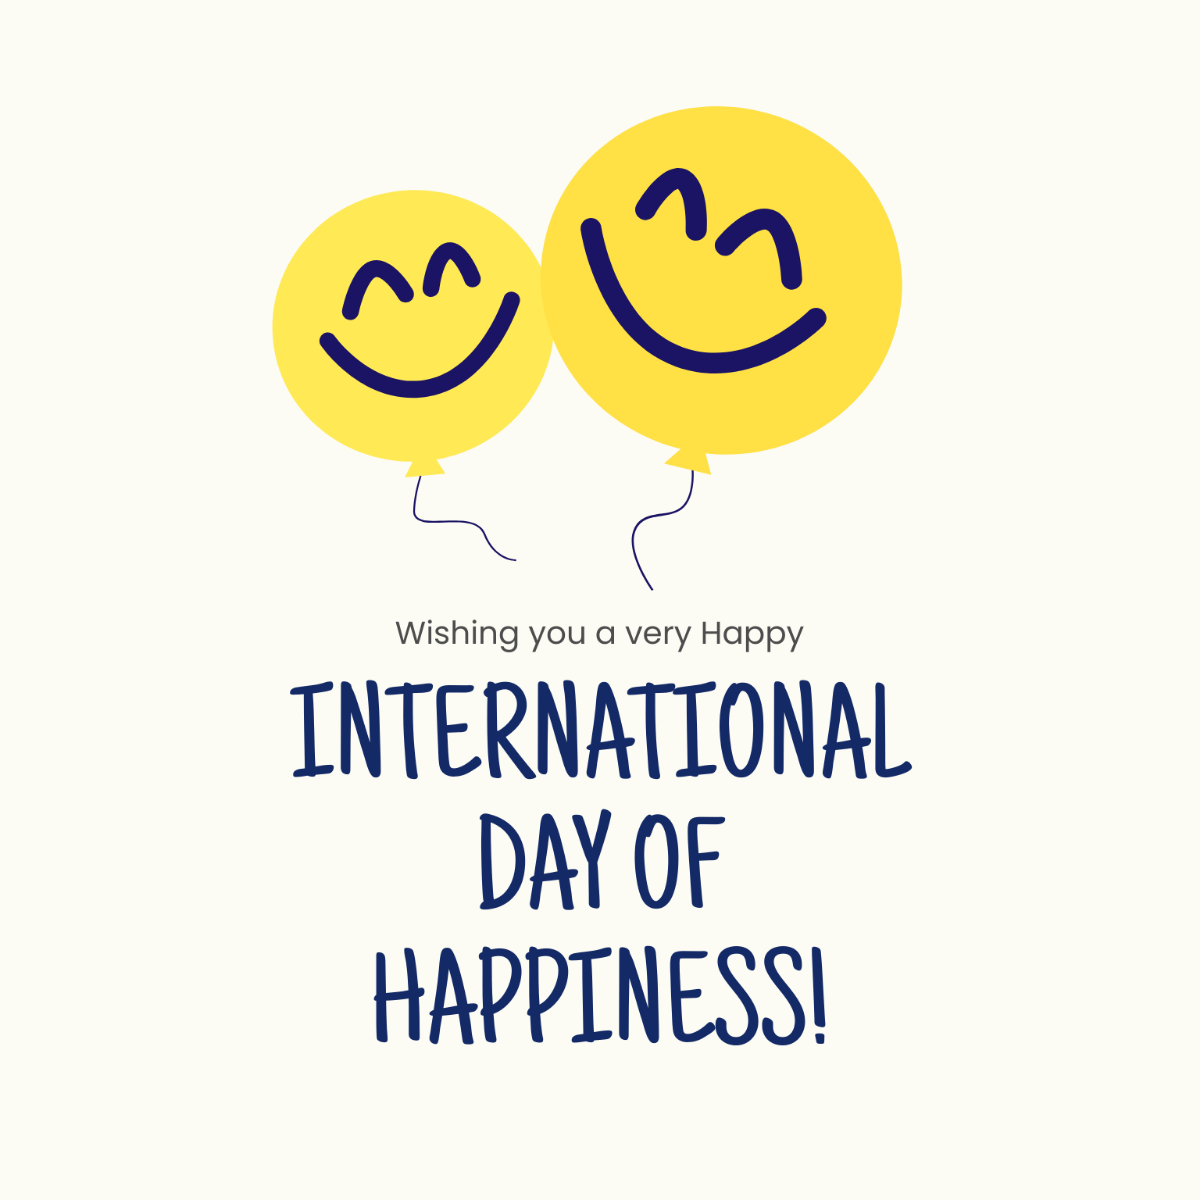 International Day of Happiness Wishes Vector